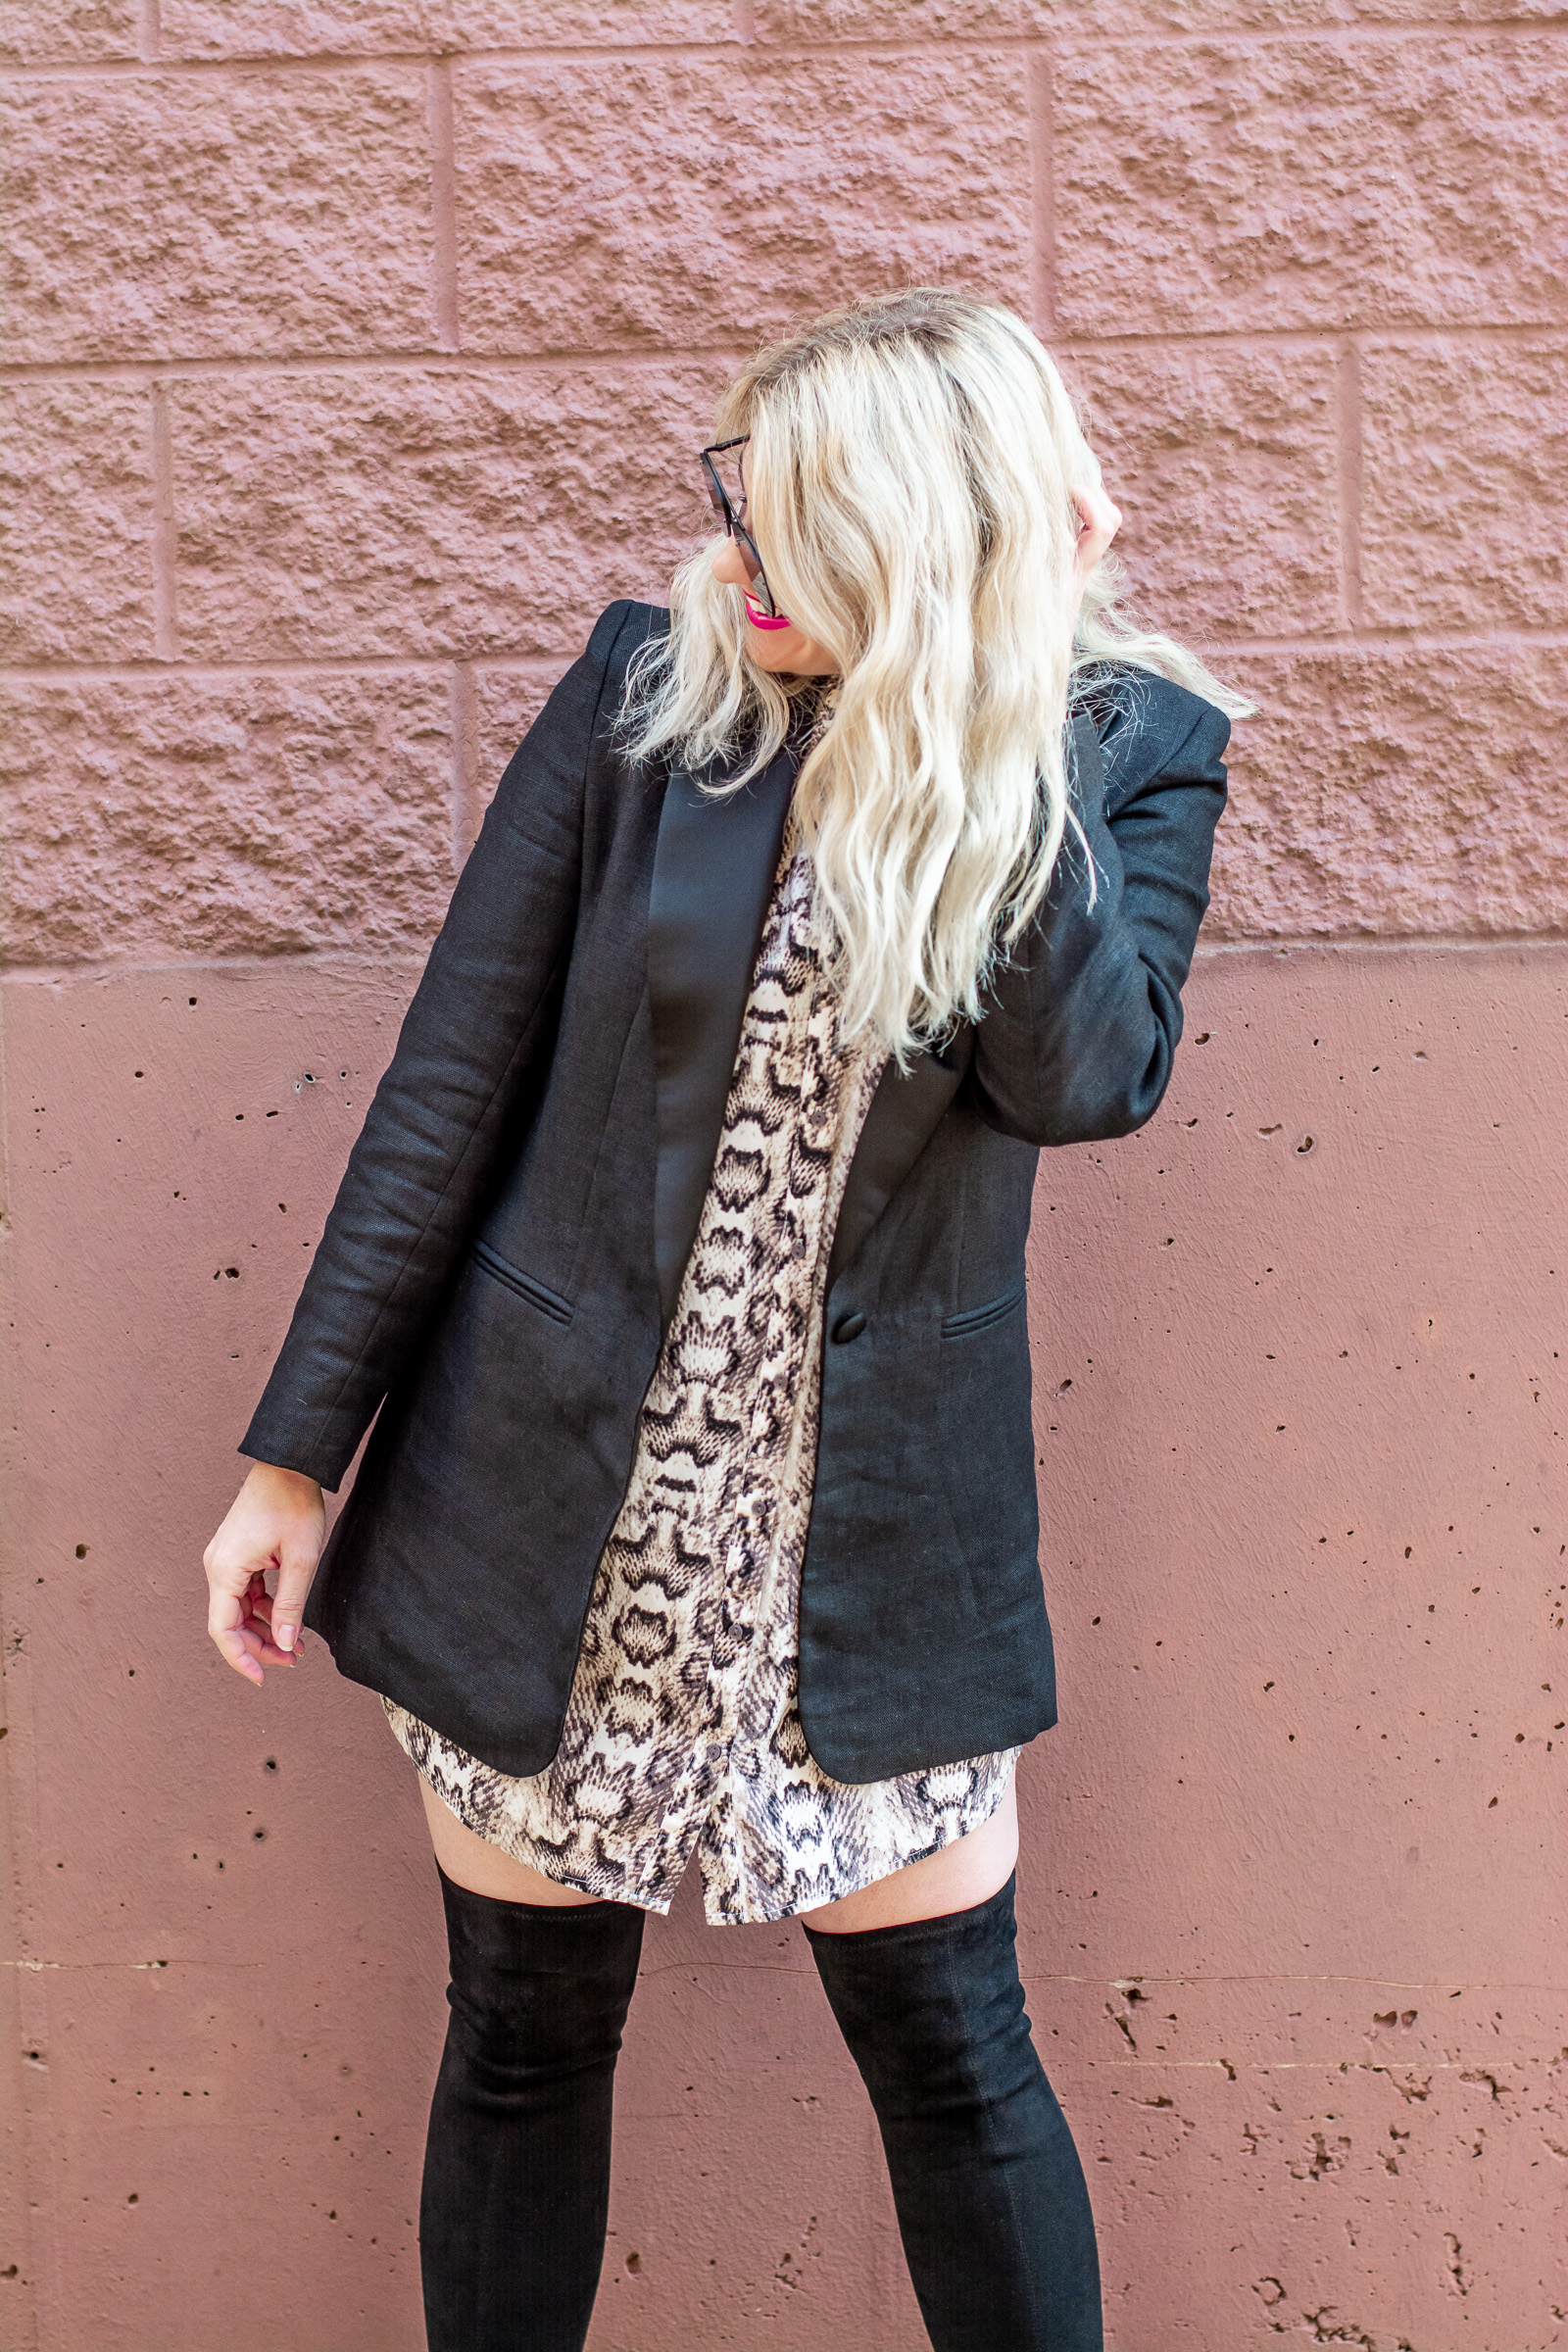 Holiday Outfit: Snakeskin Dress + OTK Boots. | LSR